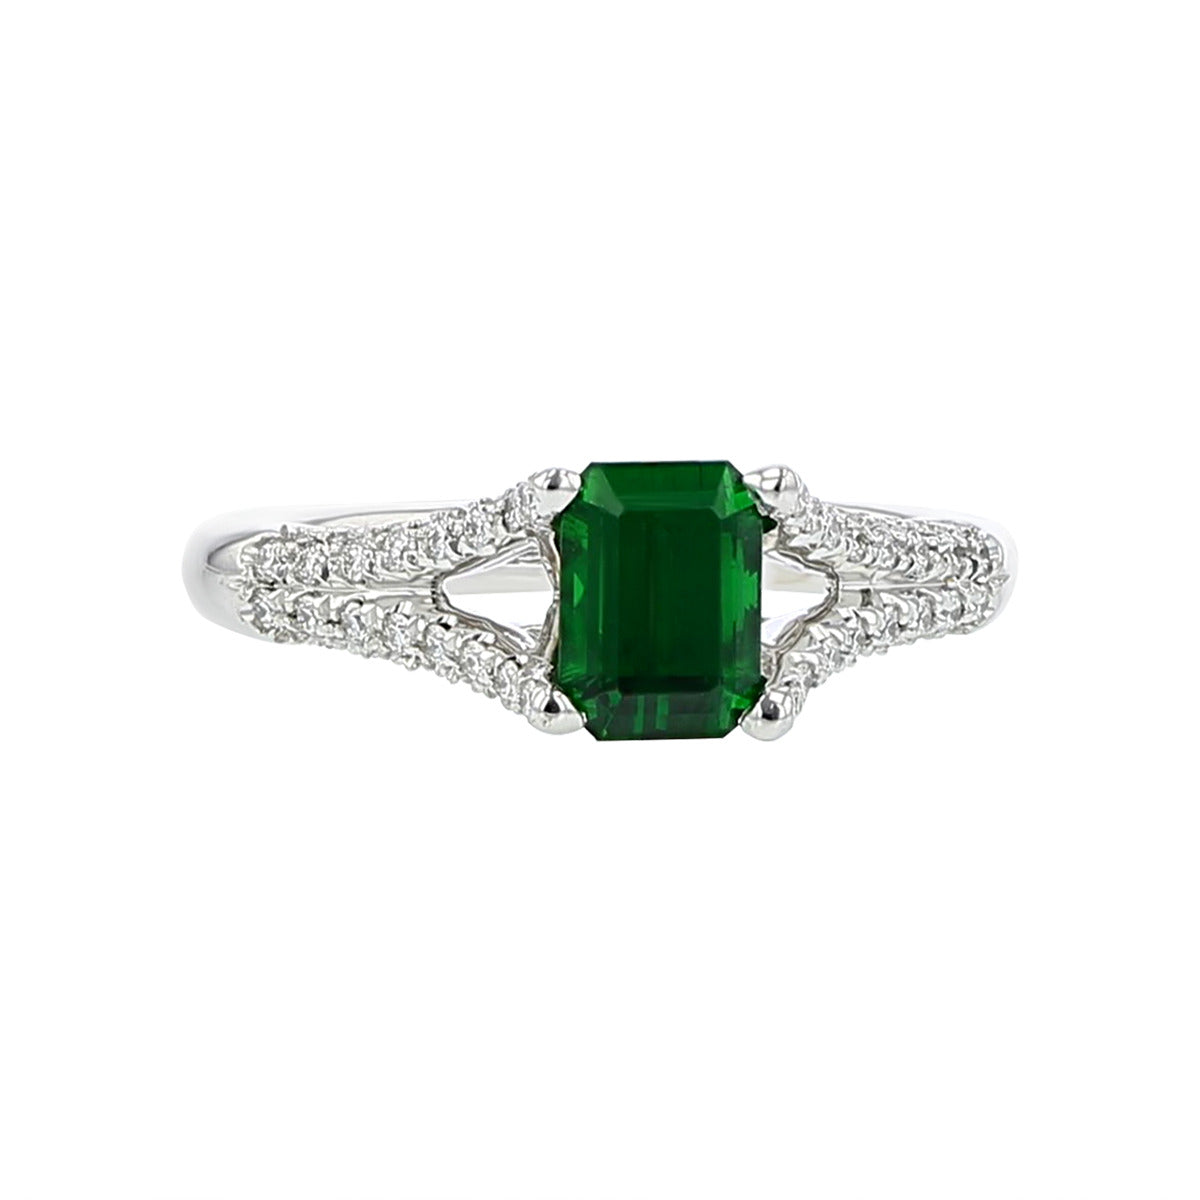 Oval Green Tsavorite Engagement Ring with Diamond Accents 14K Gold